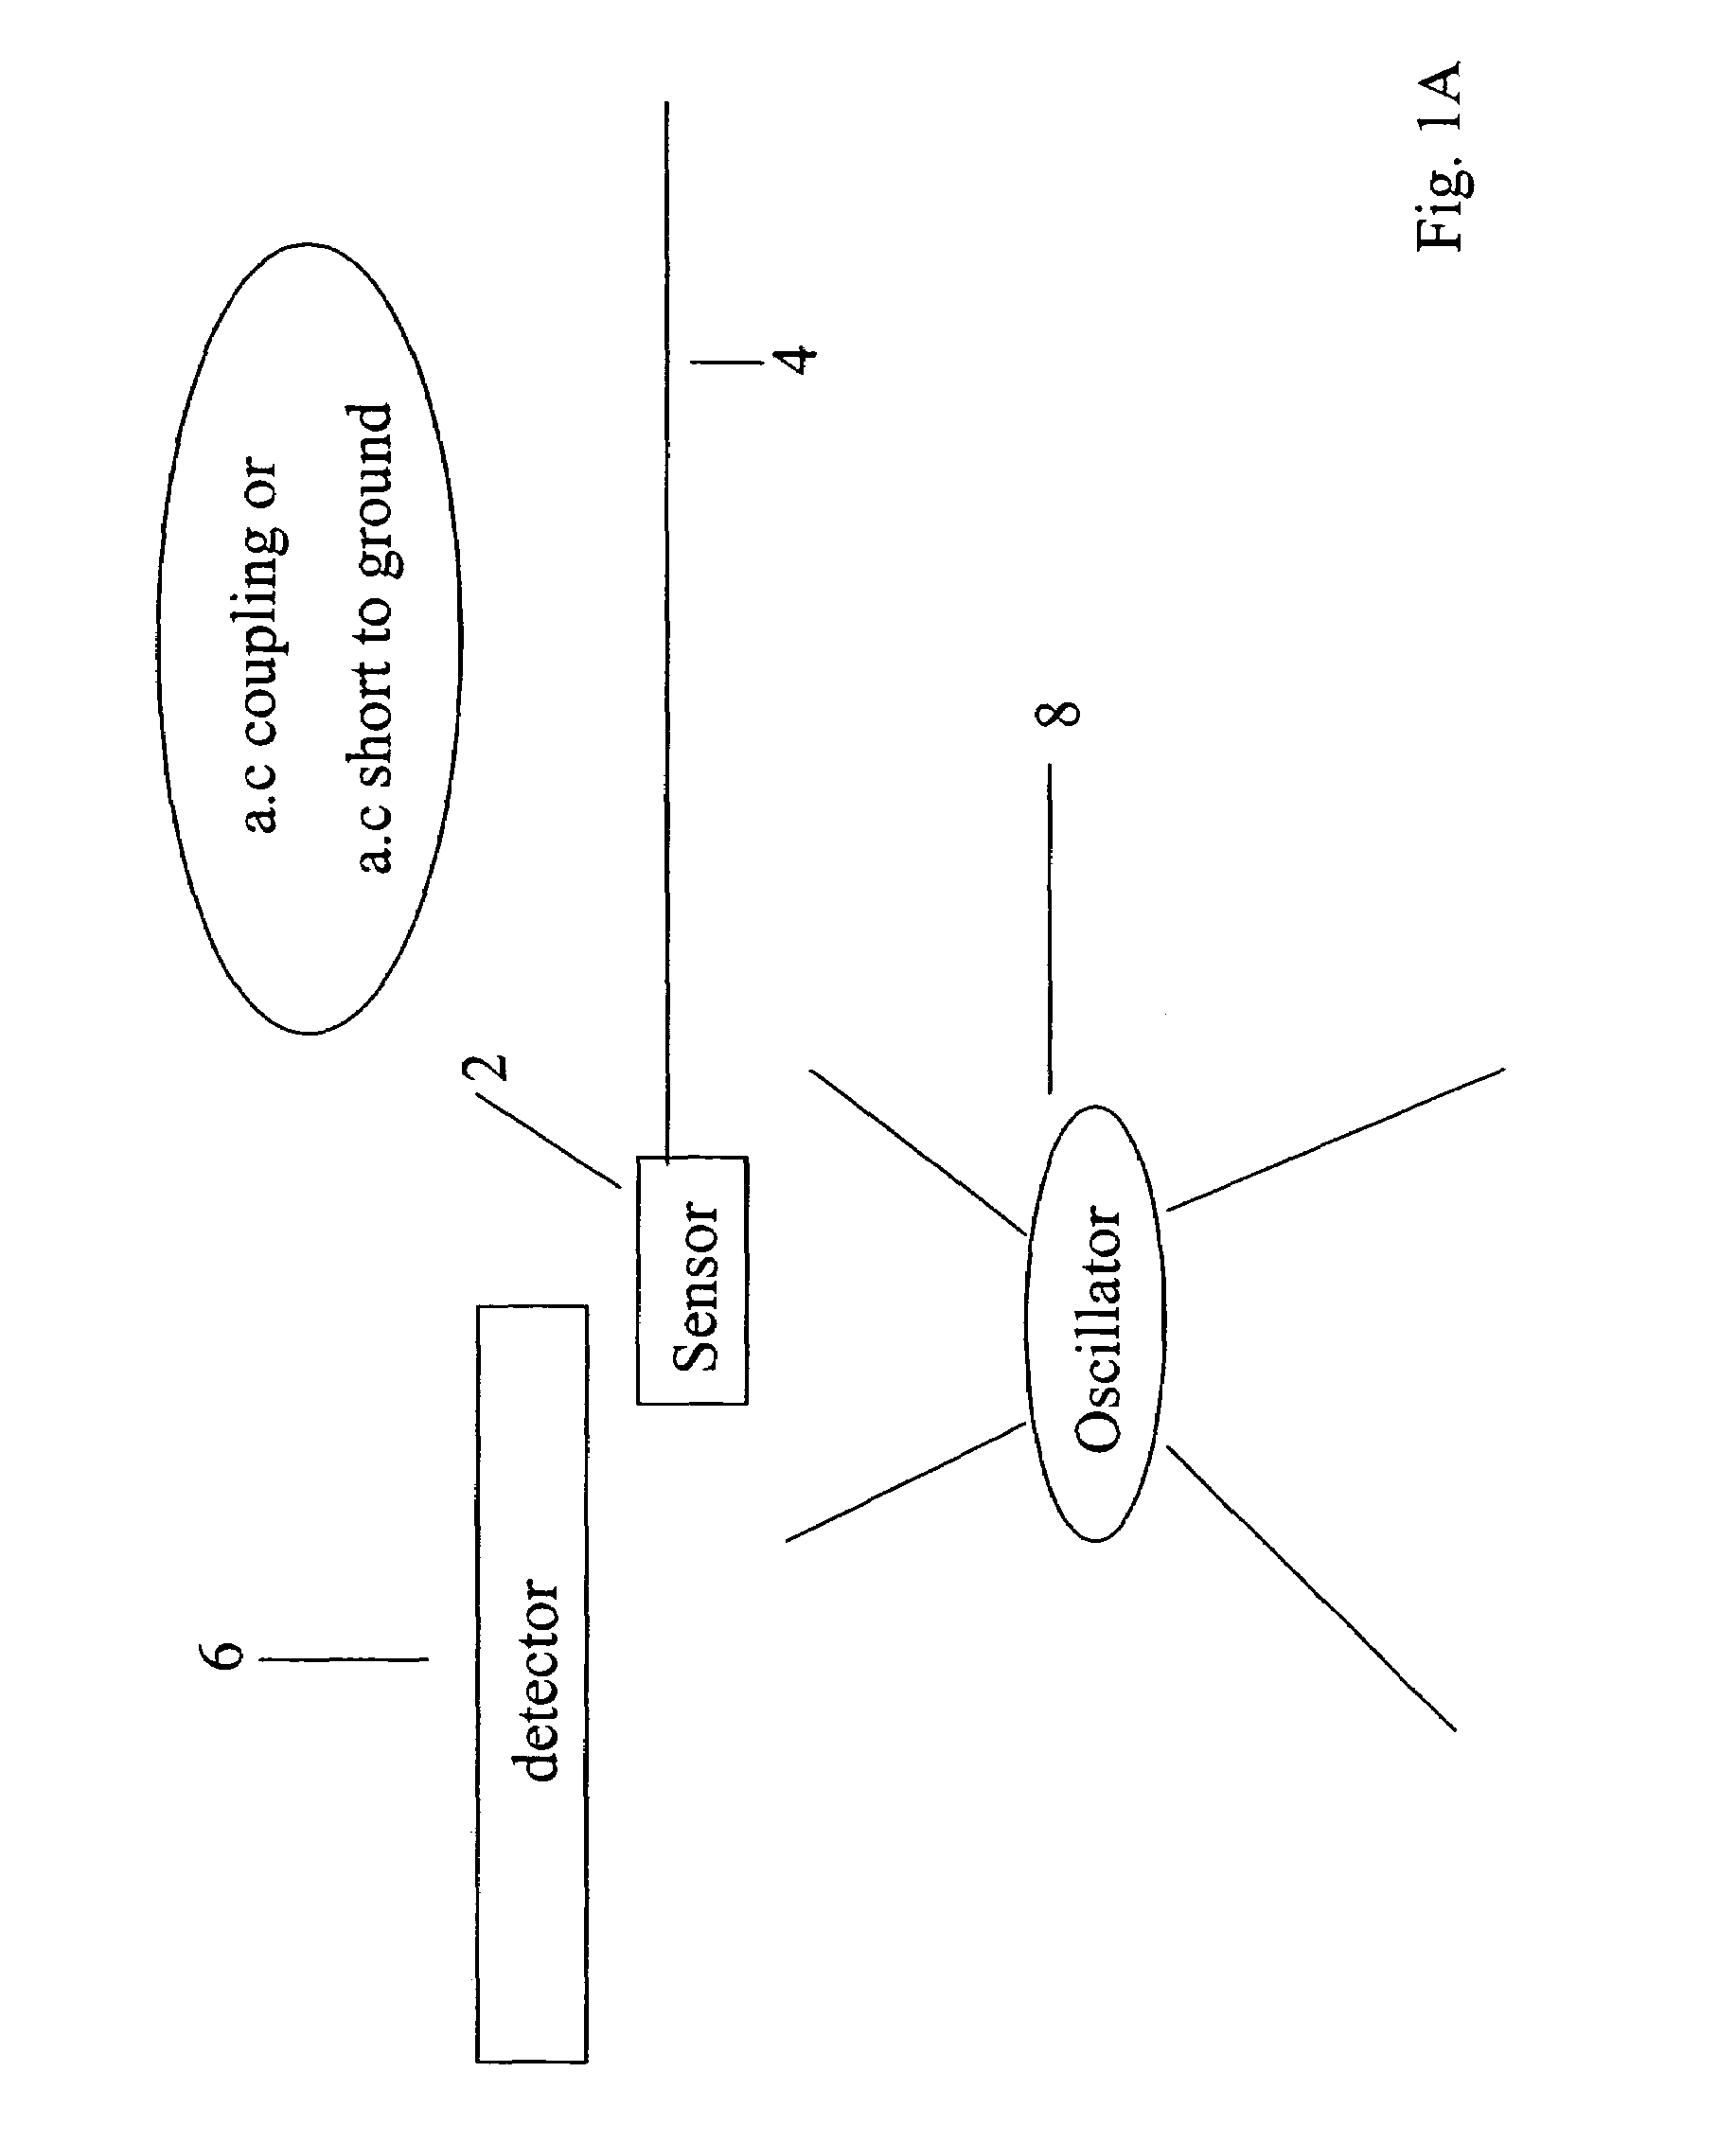 Touch detection for a digitizer